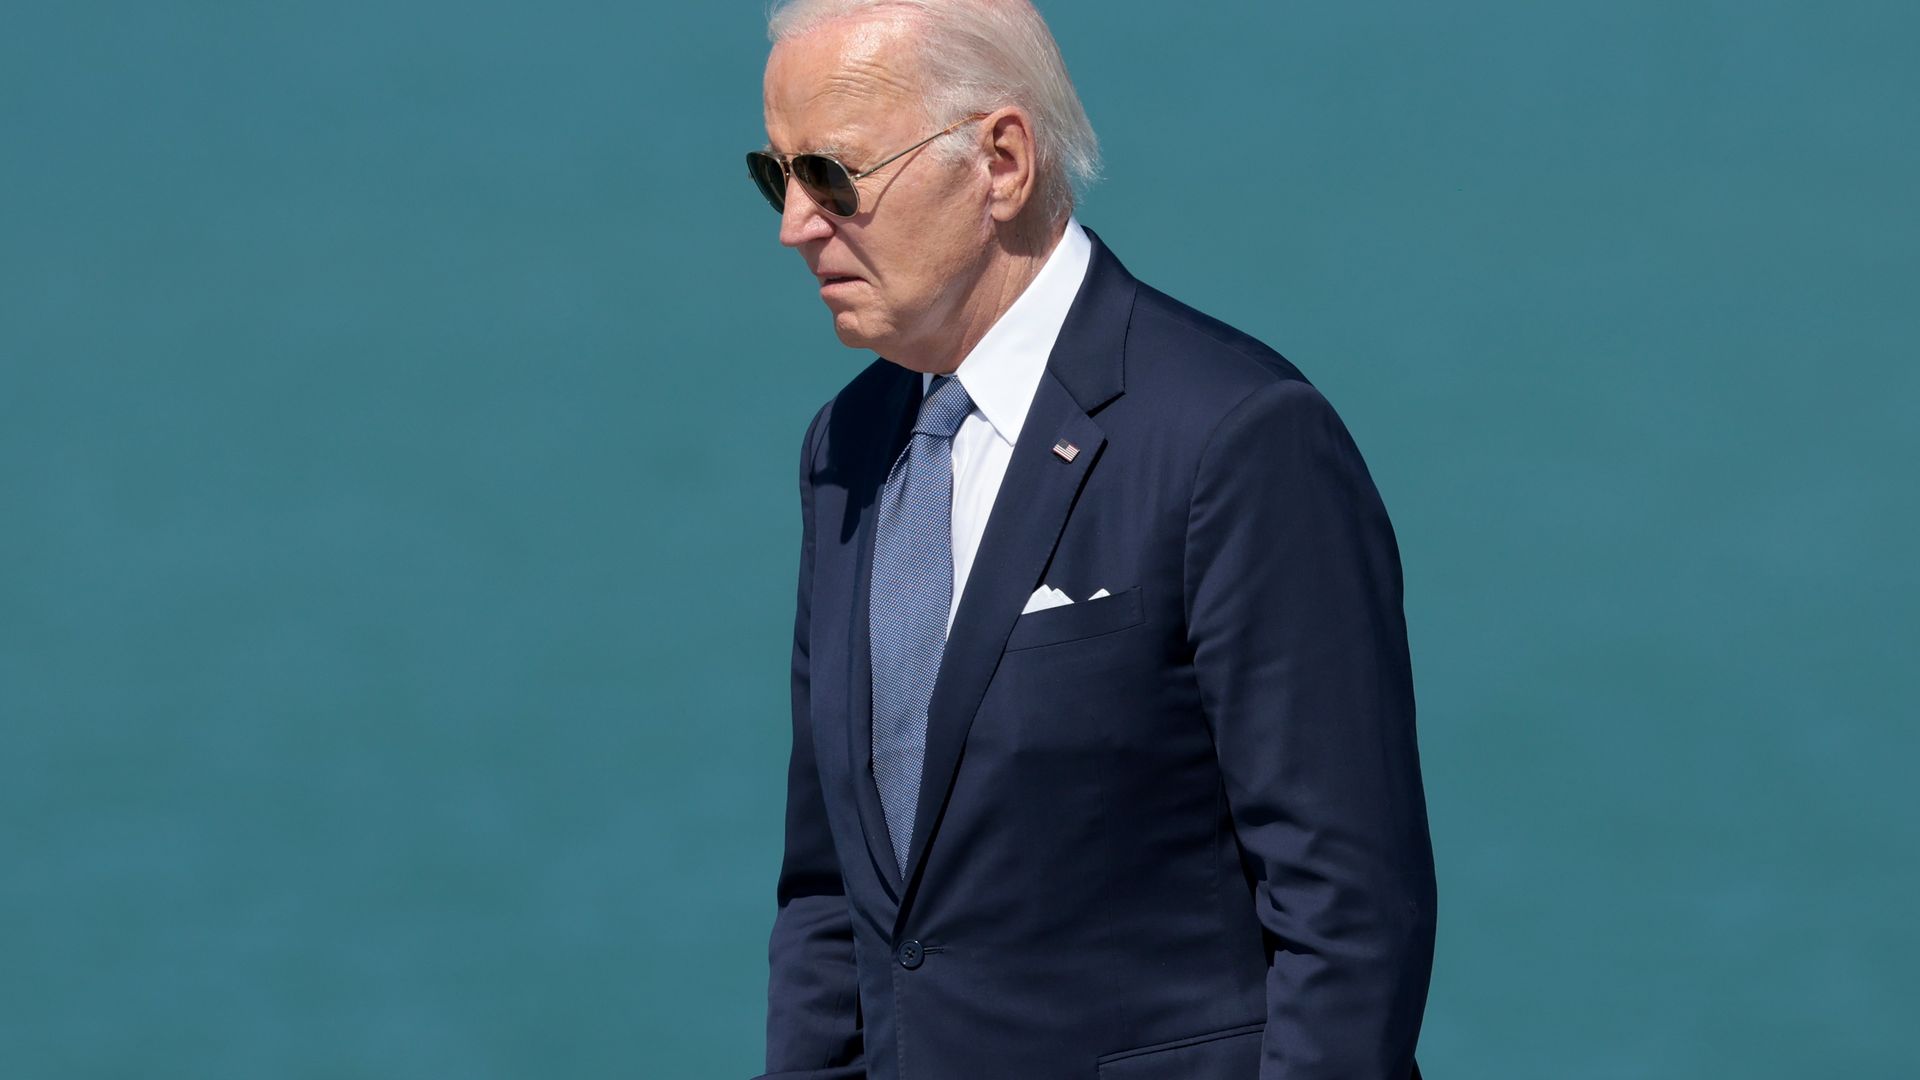 Biden administration officials hope it will help the president with the Latino vote in battleground states like Arizona, Nevada and Georgia.